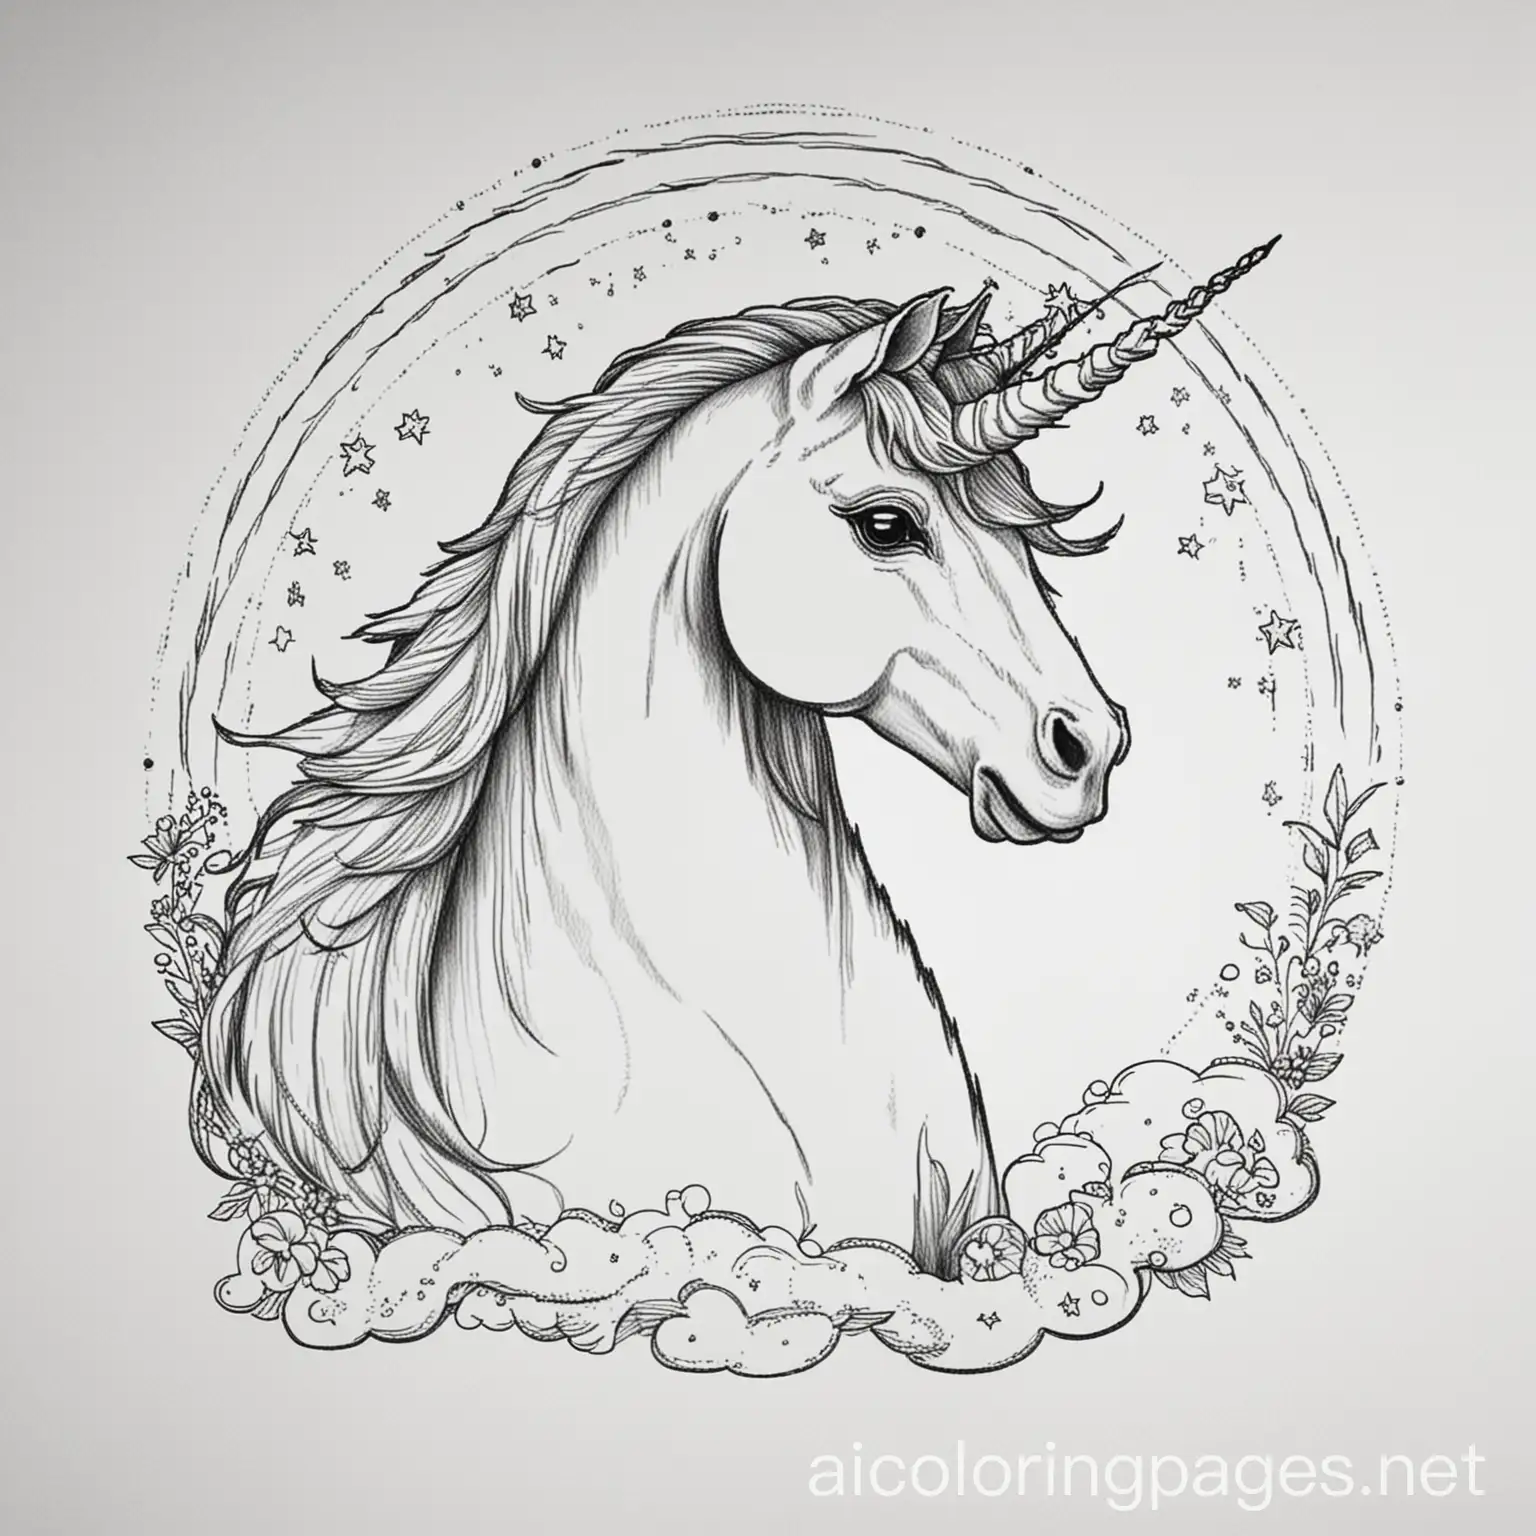 unicorn and rainbow, Coloring Page, black and white, line art, white background, Simplicity, Ample White Space. The background of the coloring page is plain white to make it easy for young children to color within the lines. The outlines of all the subjects are easy to distinguish, making it simple for kids to color without too much difficulty